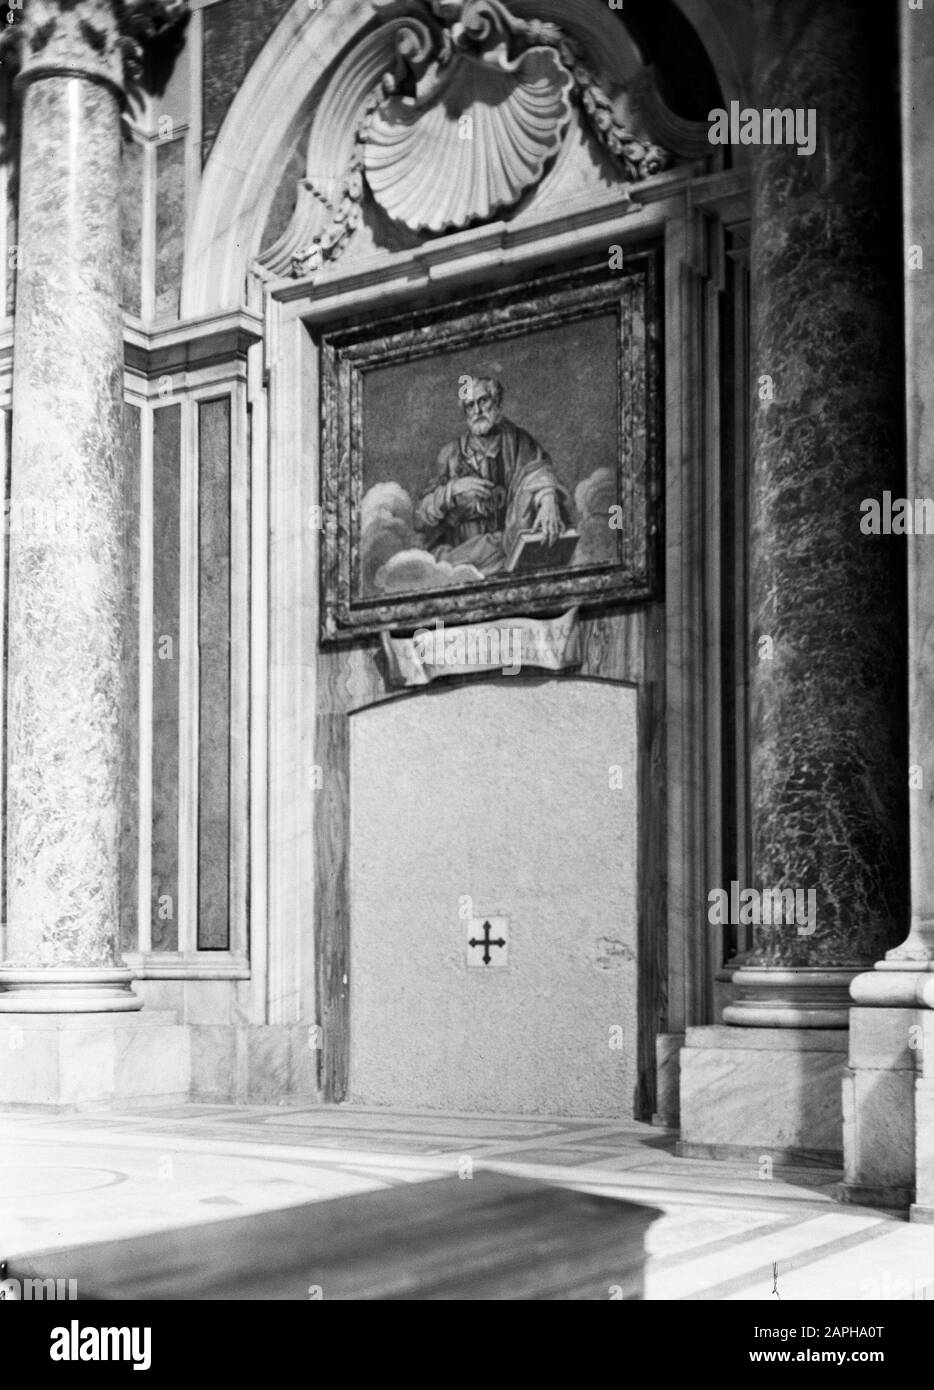 Rome: Visit to Vatican City Description: The masonry Holy Door in St. Peter's Basilica Date: December 1937 Location: Italy, Rome, Vatican City Keywords: architecture, baroque, doors, interior, church buildings Institutional name: Sint Pieter Stock Photo